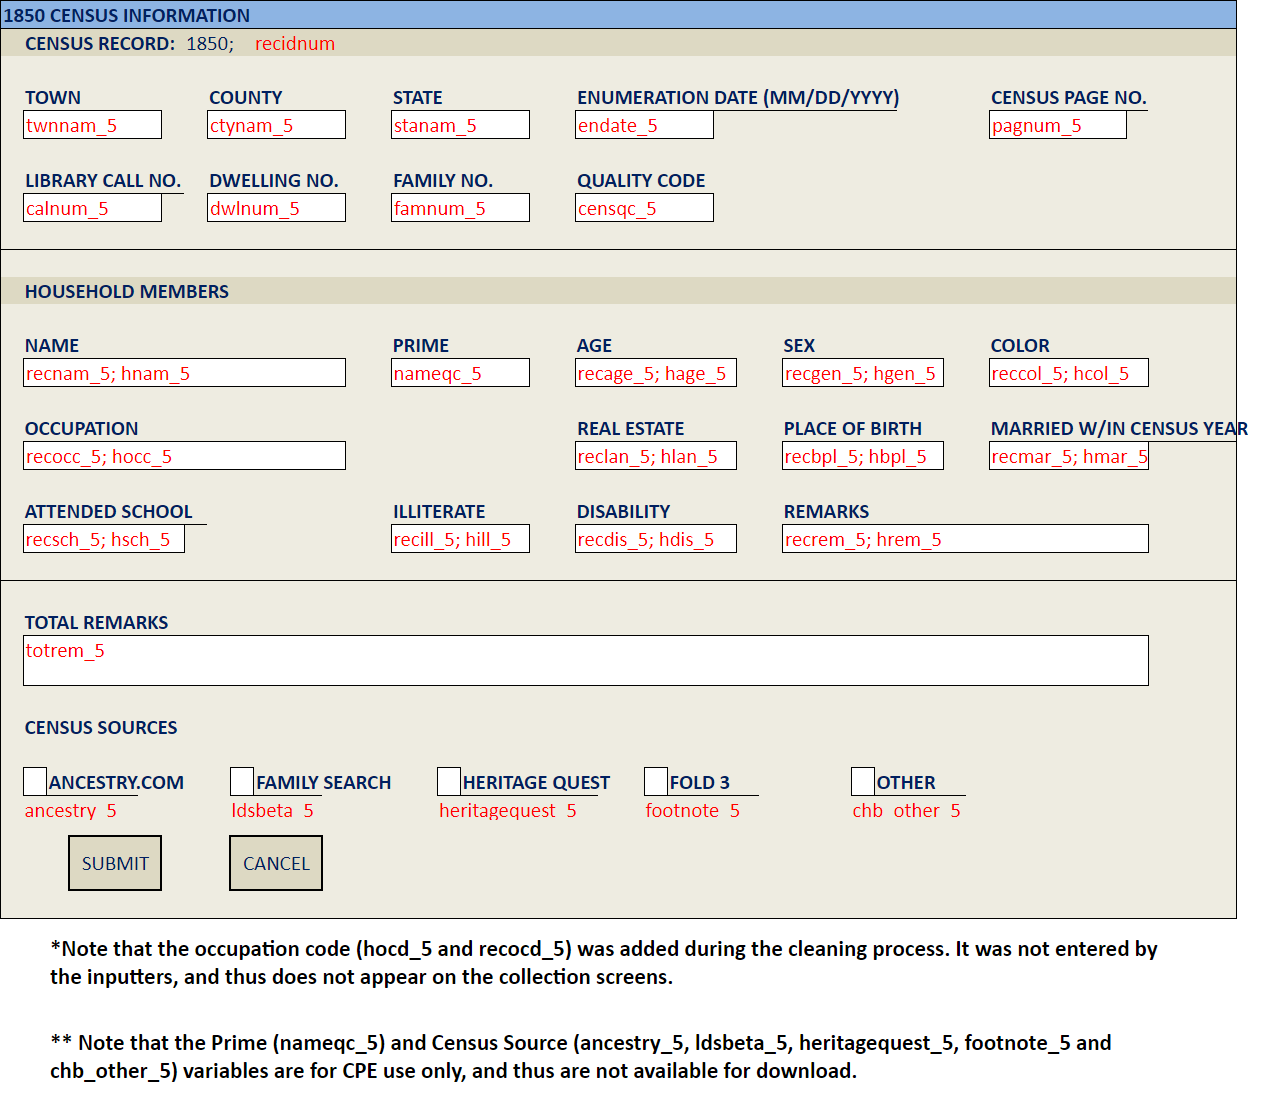 Image of the Union Army 1850 Census data entry screen